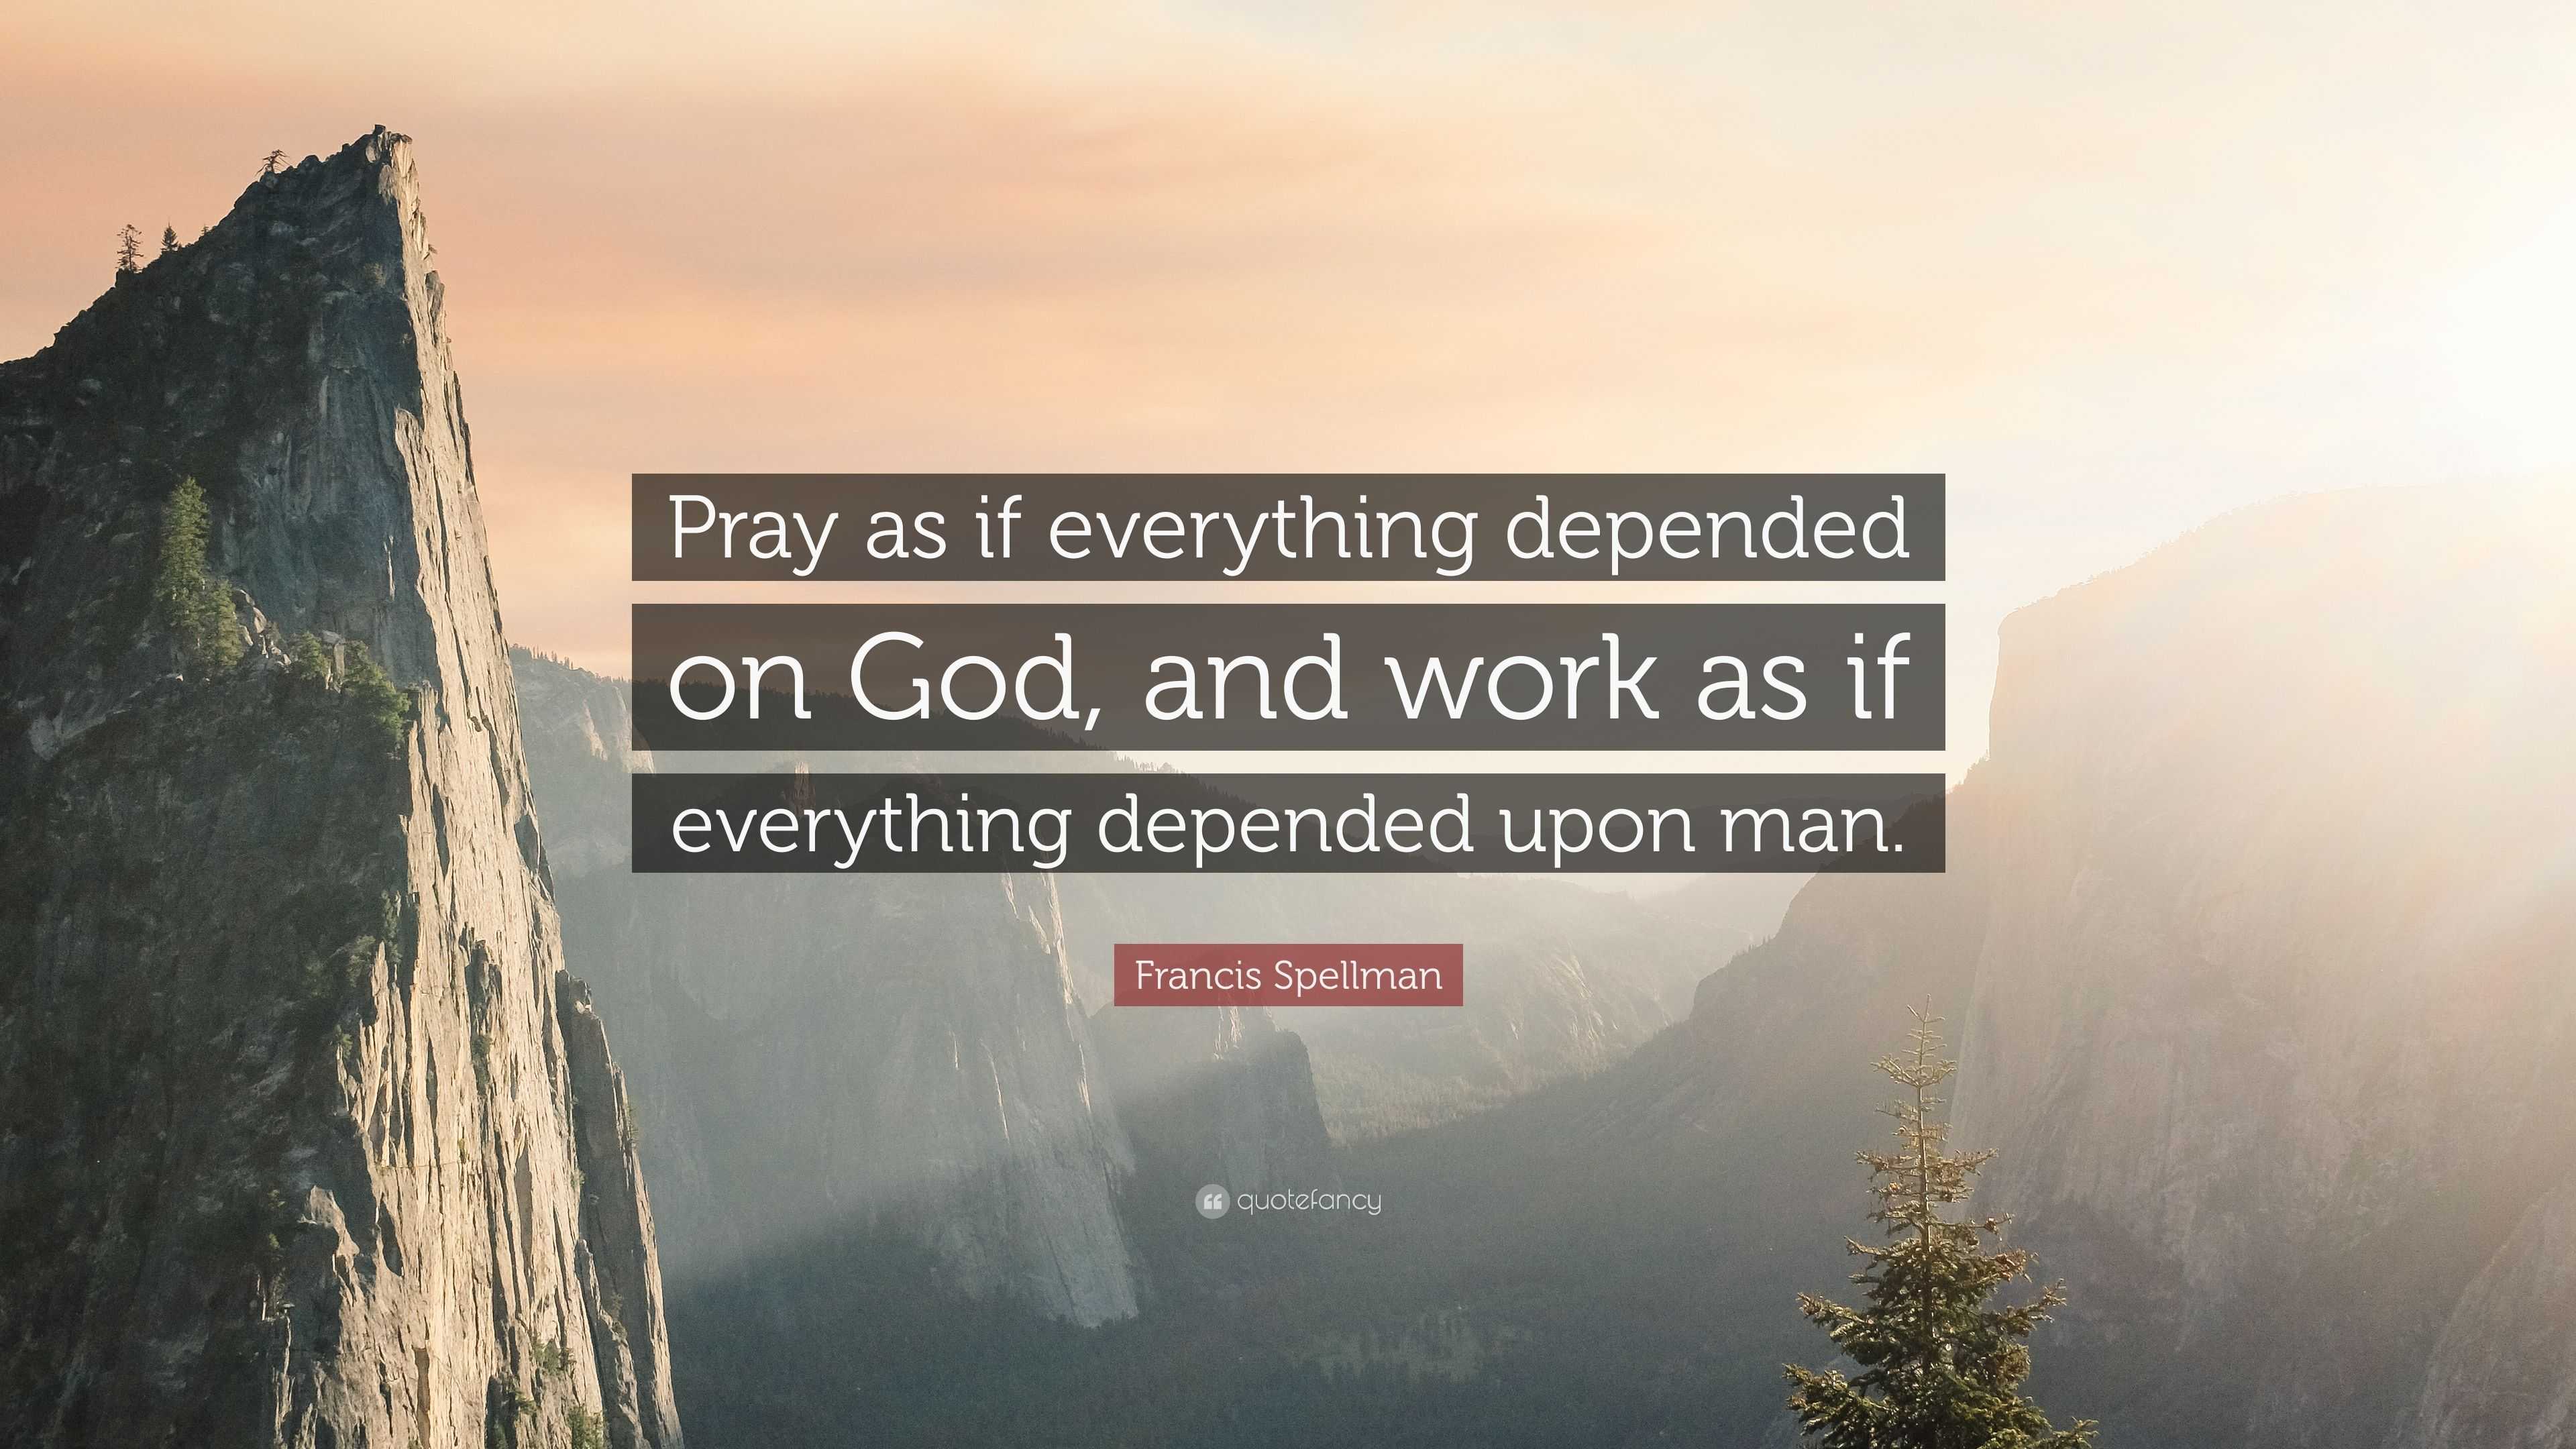 Francis Spellman Quote: “Pray as if everything depended on God, and ...